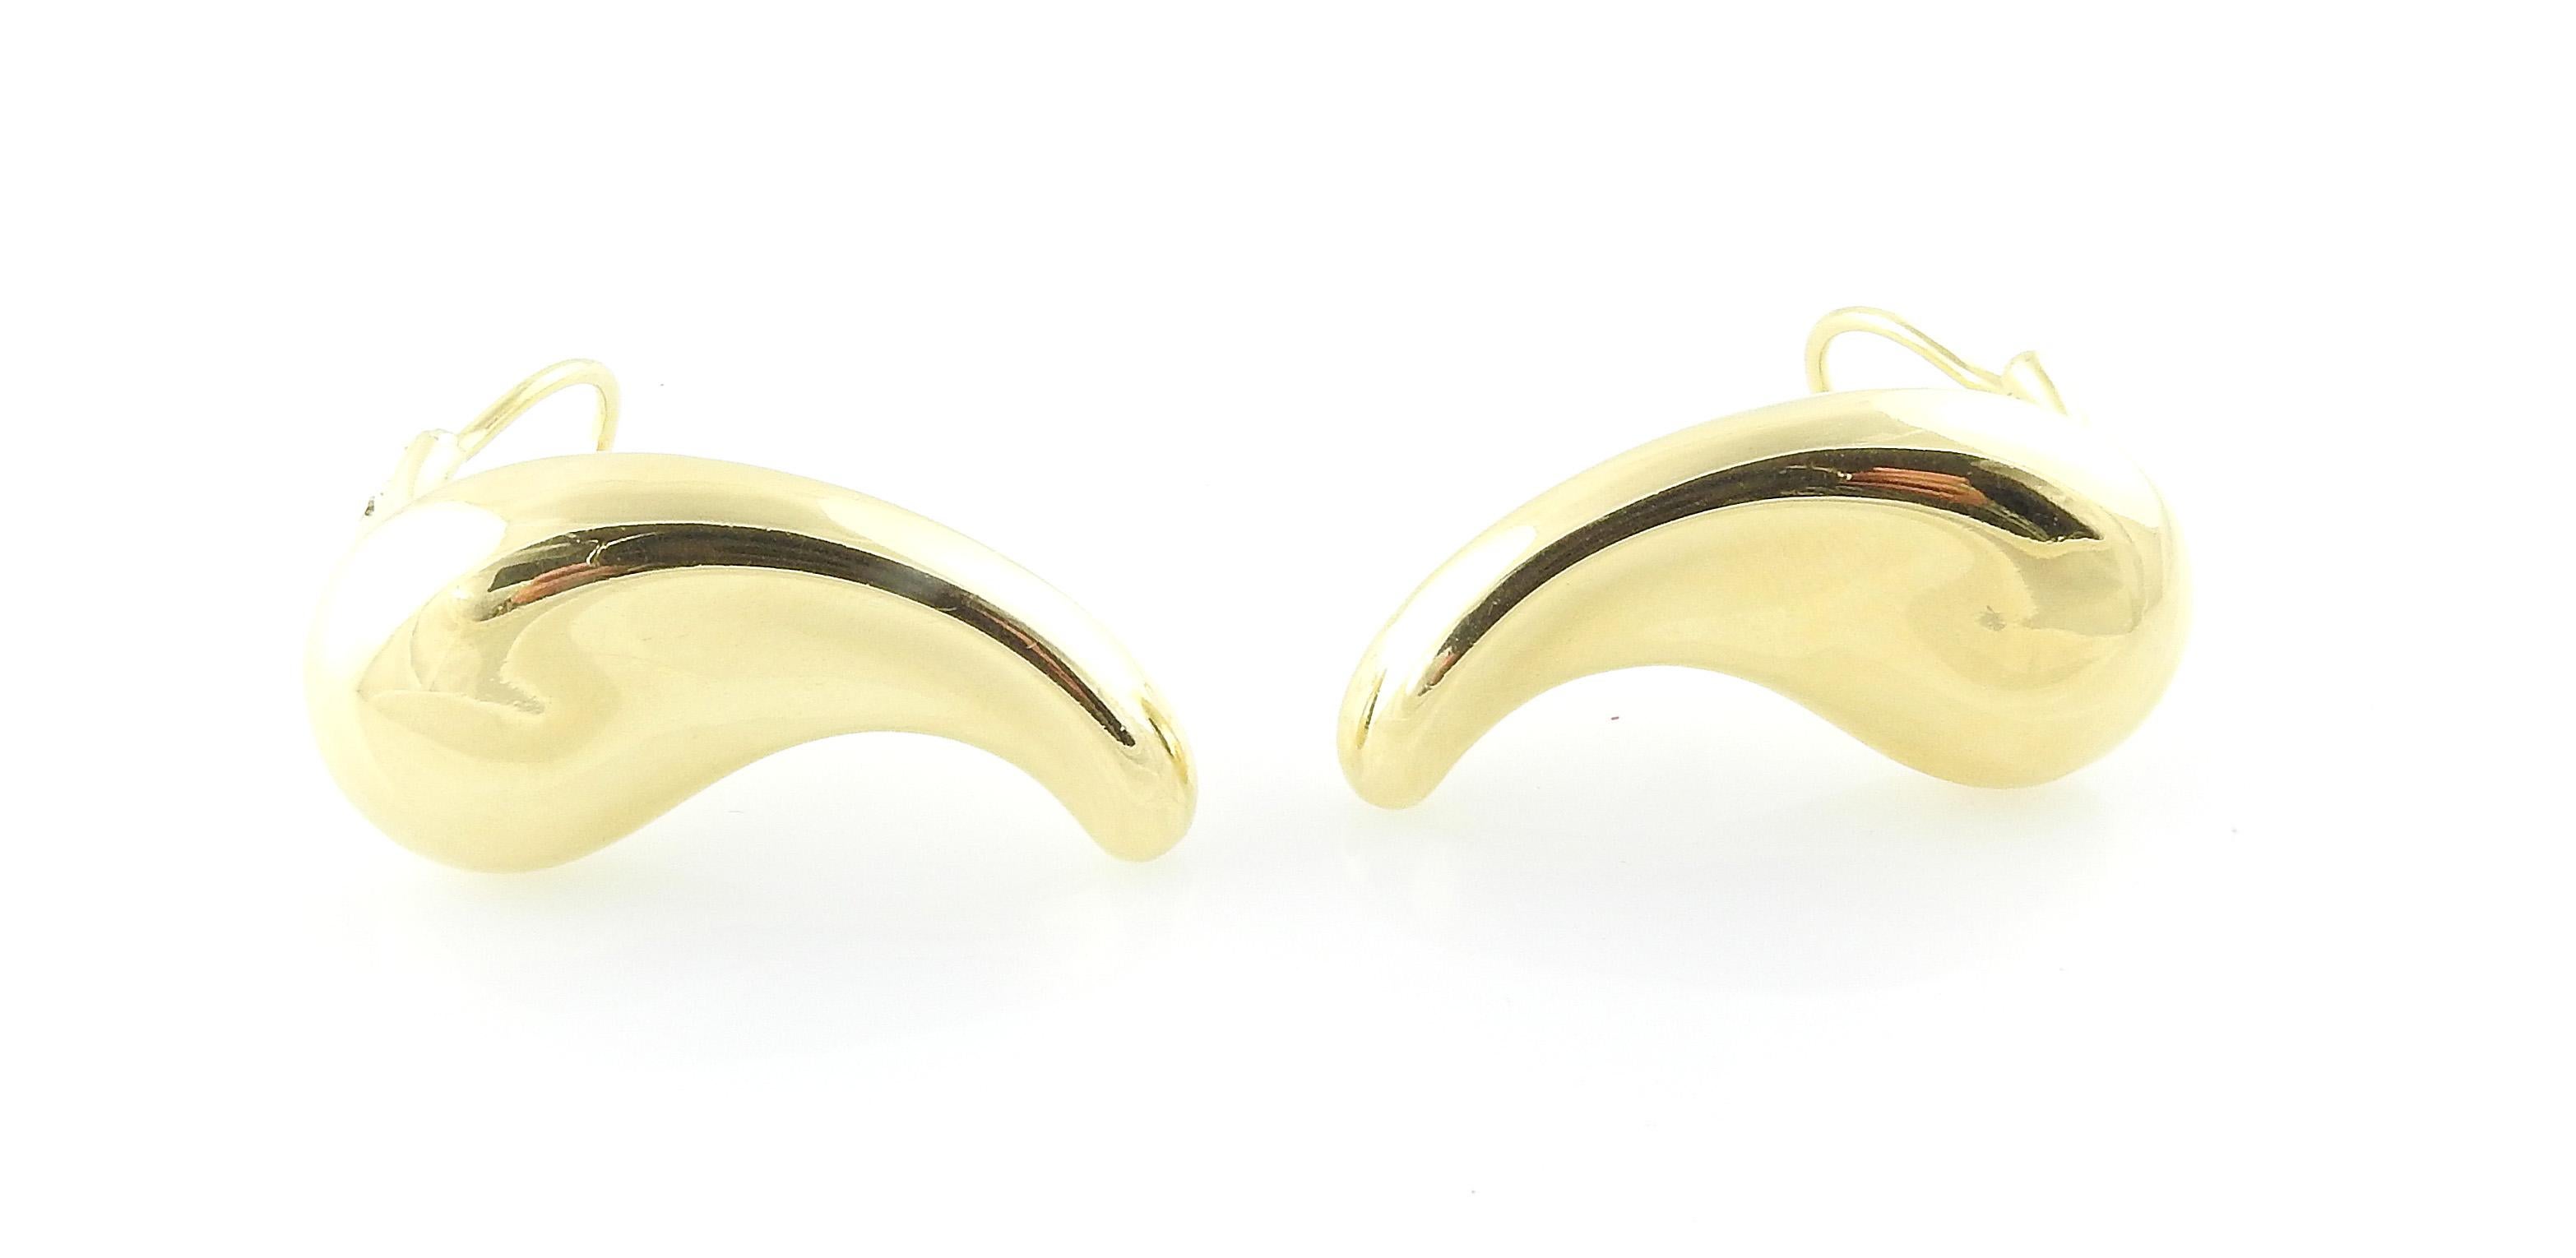 Tiffany & Co. Peretti X Large Bean Earrings

The bean is a classic Elsa Peretti design. These bean earrings are the X Large size and are made for clip on earrings / non pierced ears. 

The earrings are set in 18K yellow gold. 

Earrings are each